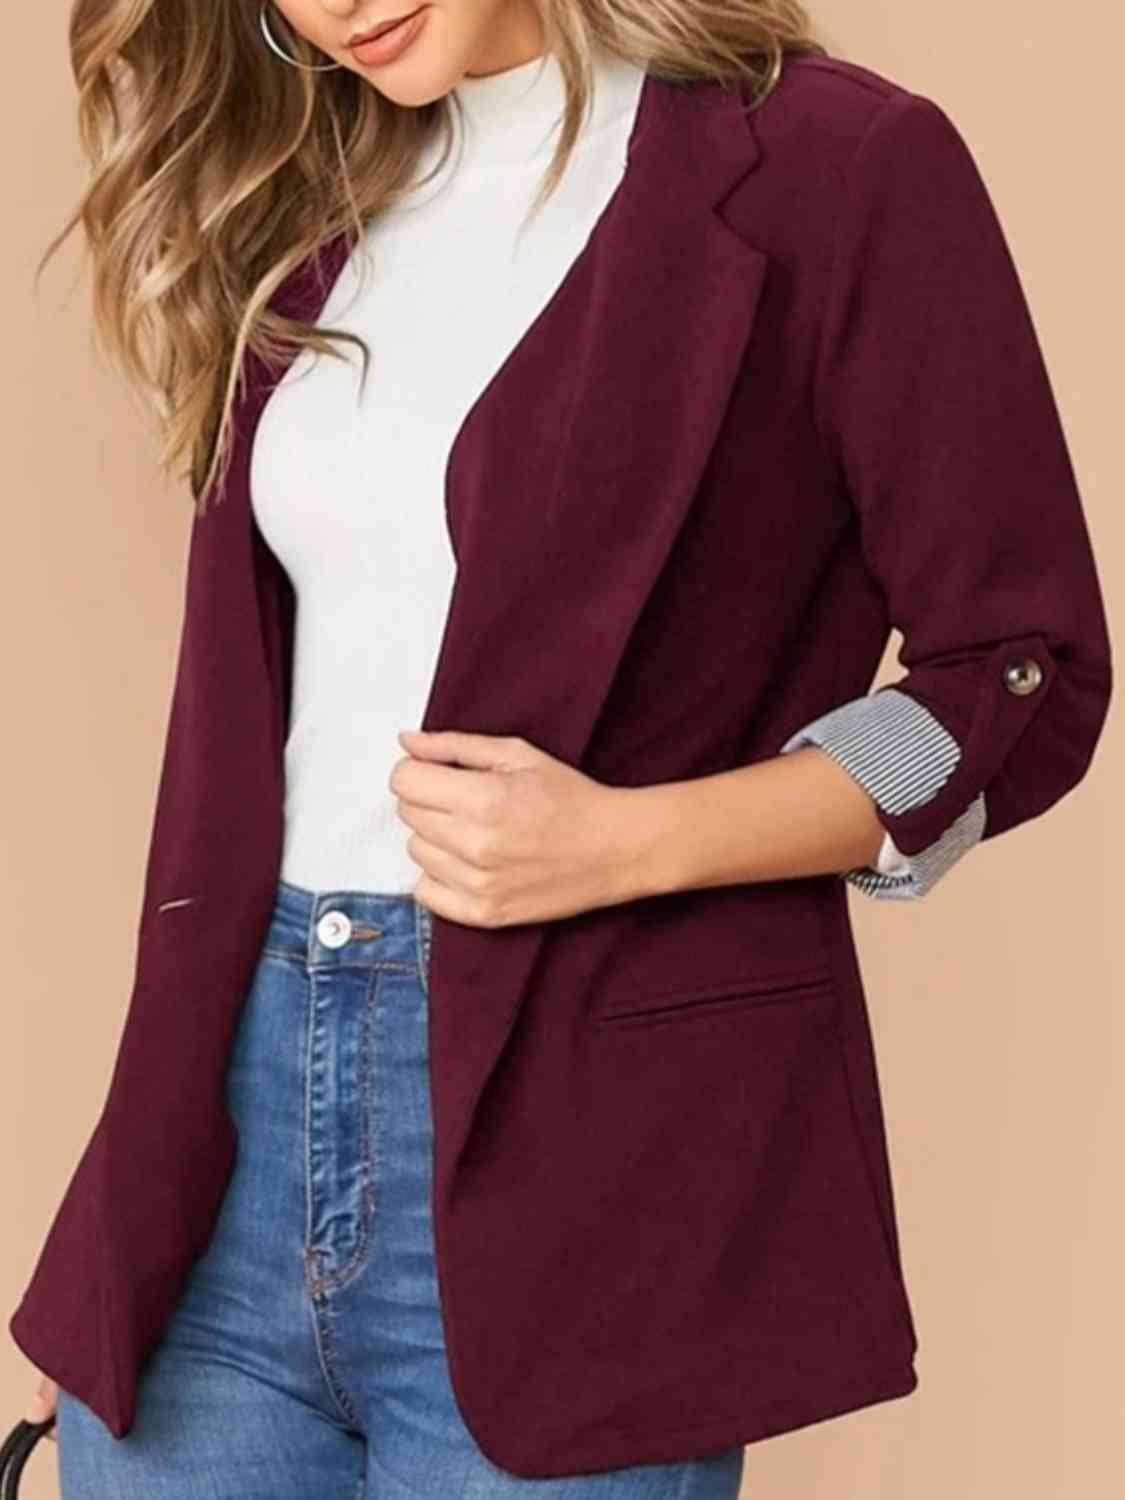 a woman wearing a burgundy blazer and jeans